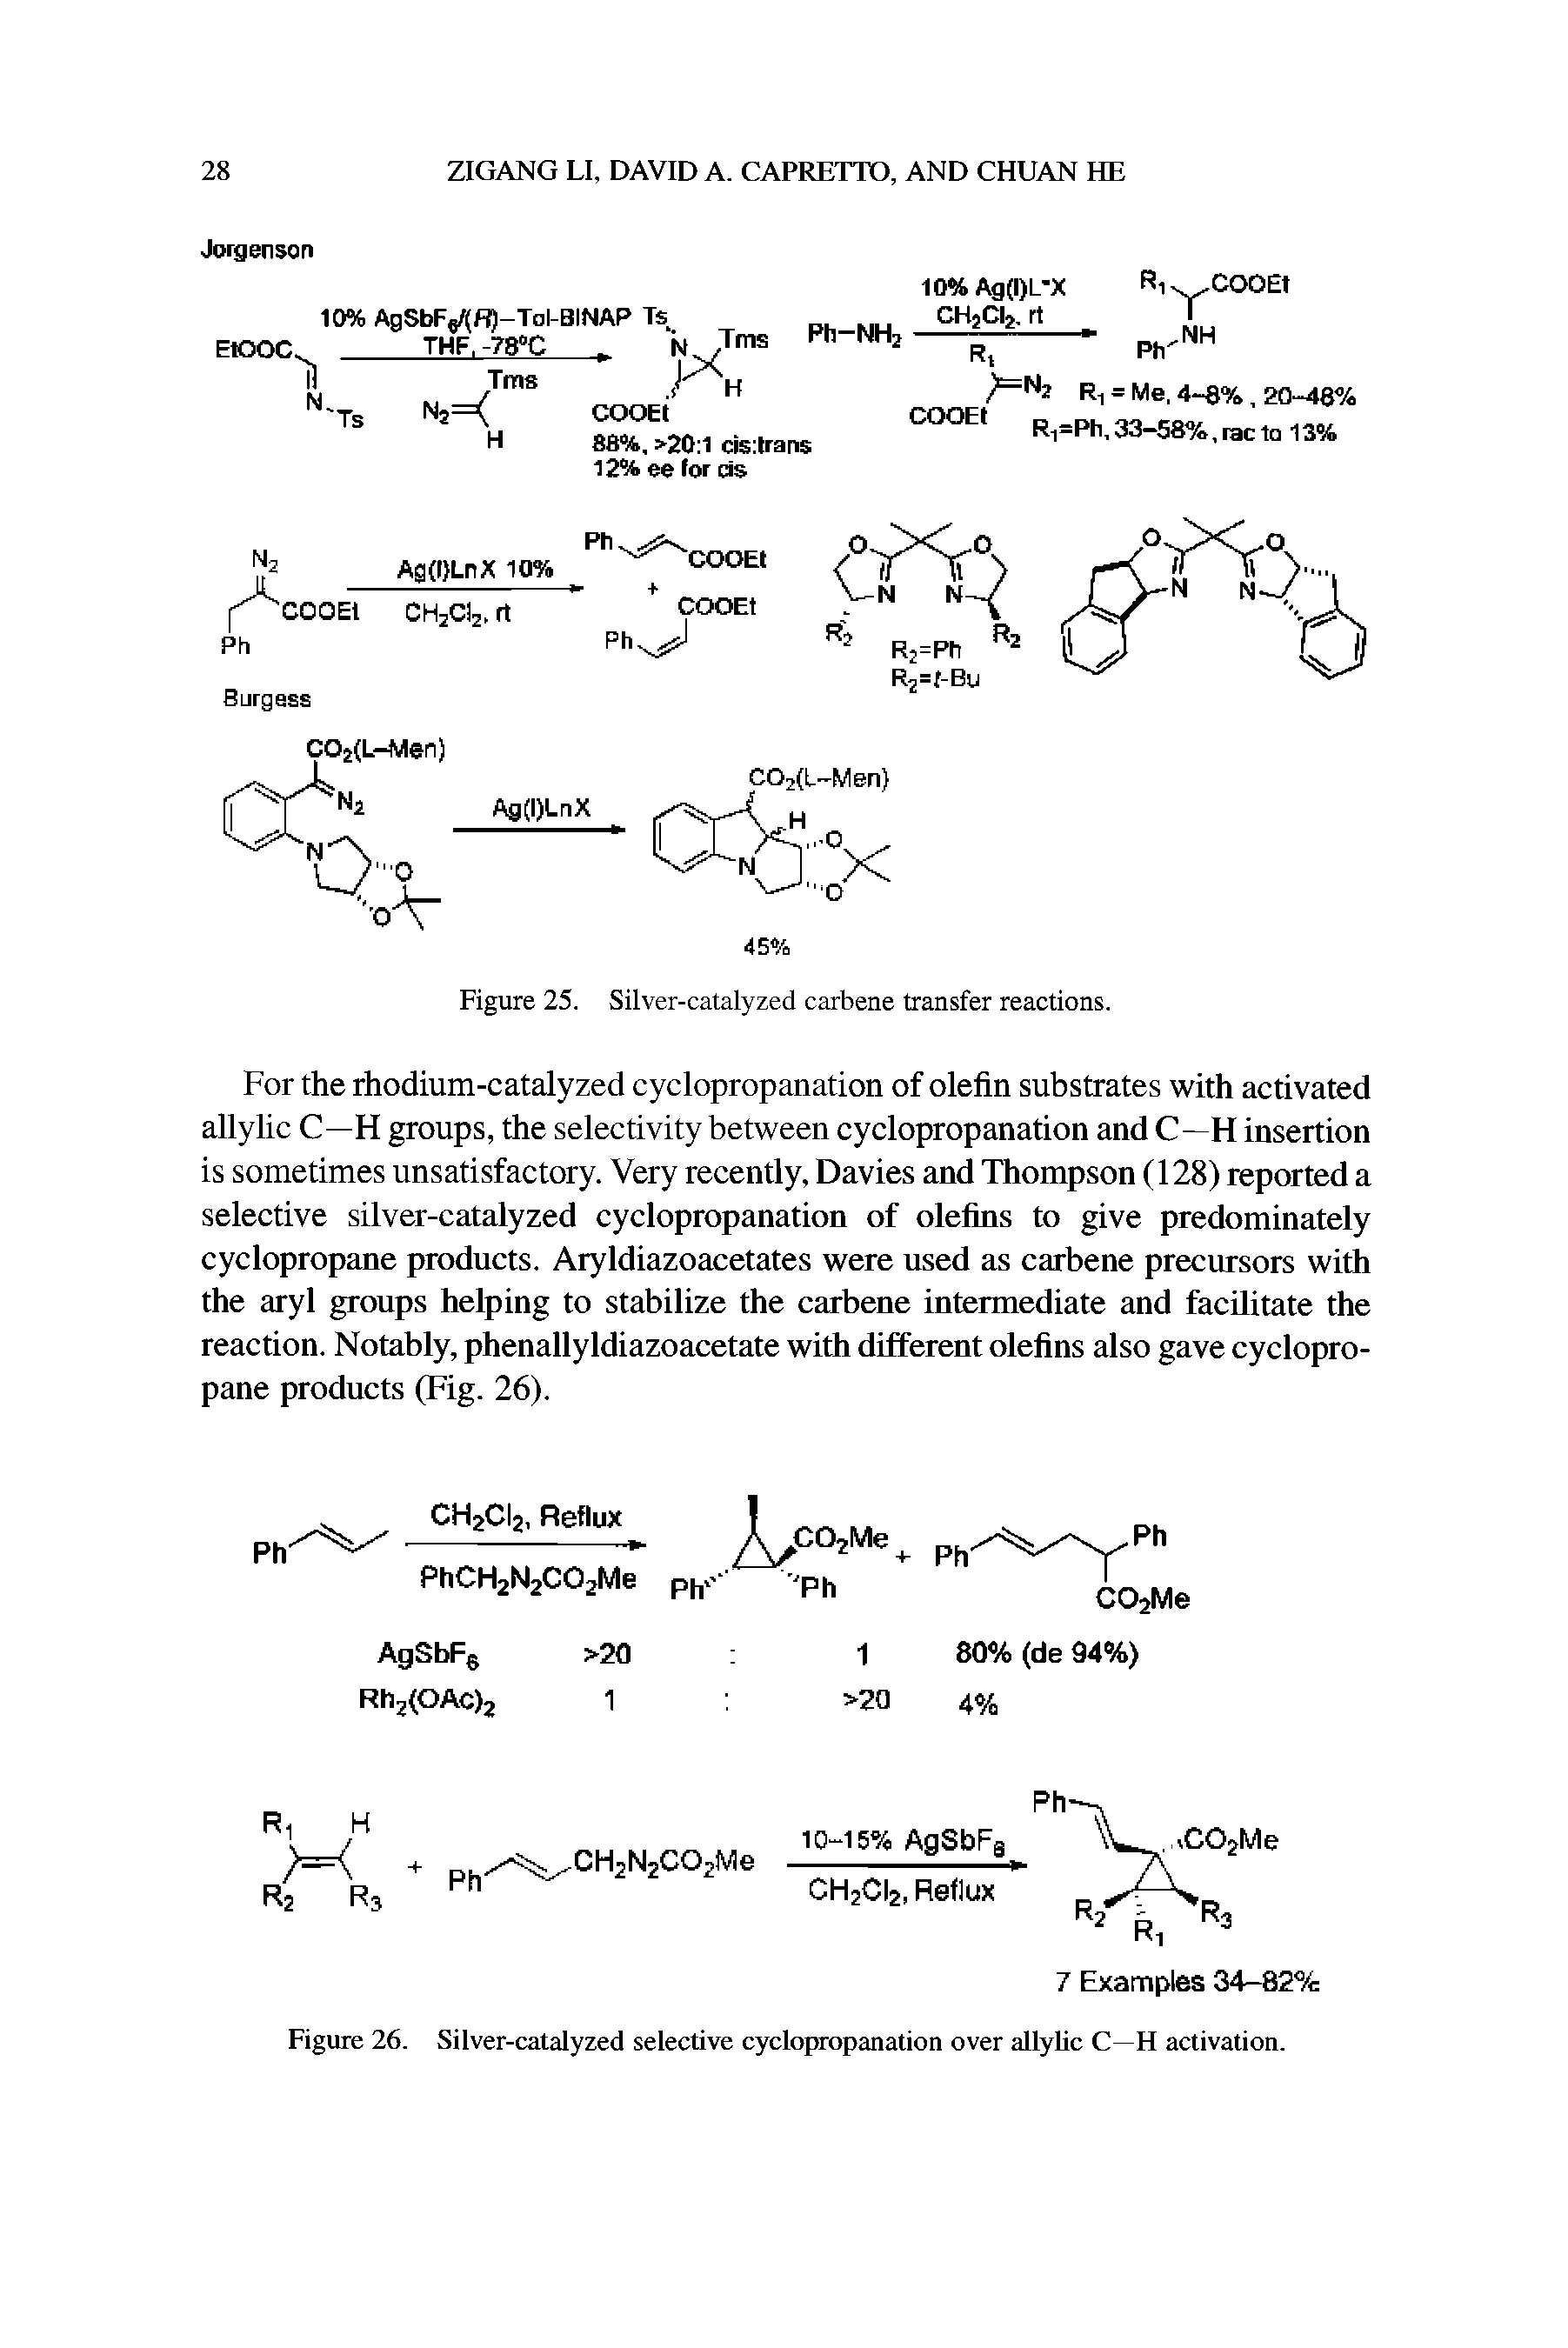 Figure 25. Silver-catalyzed carbene transfer reactions.